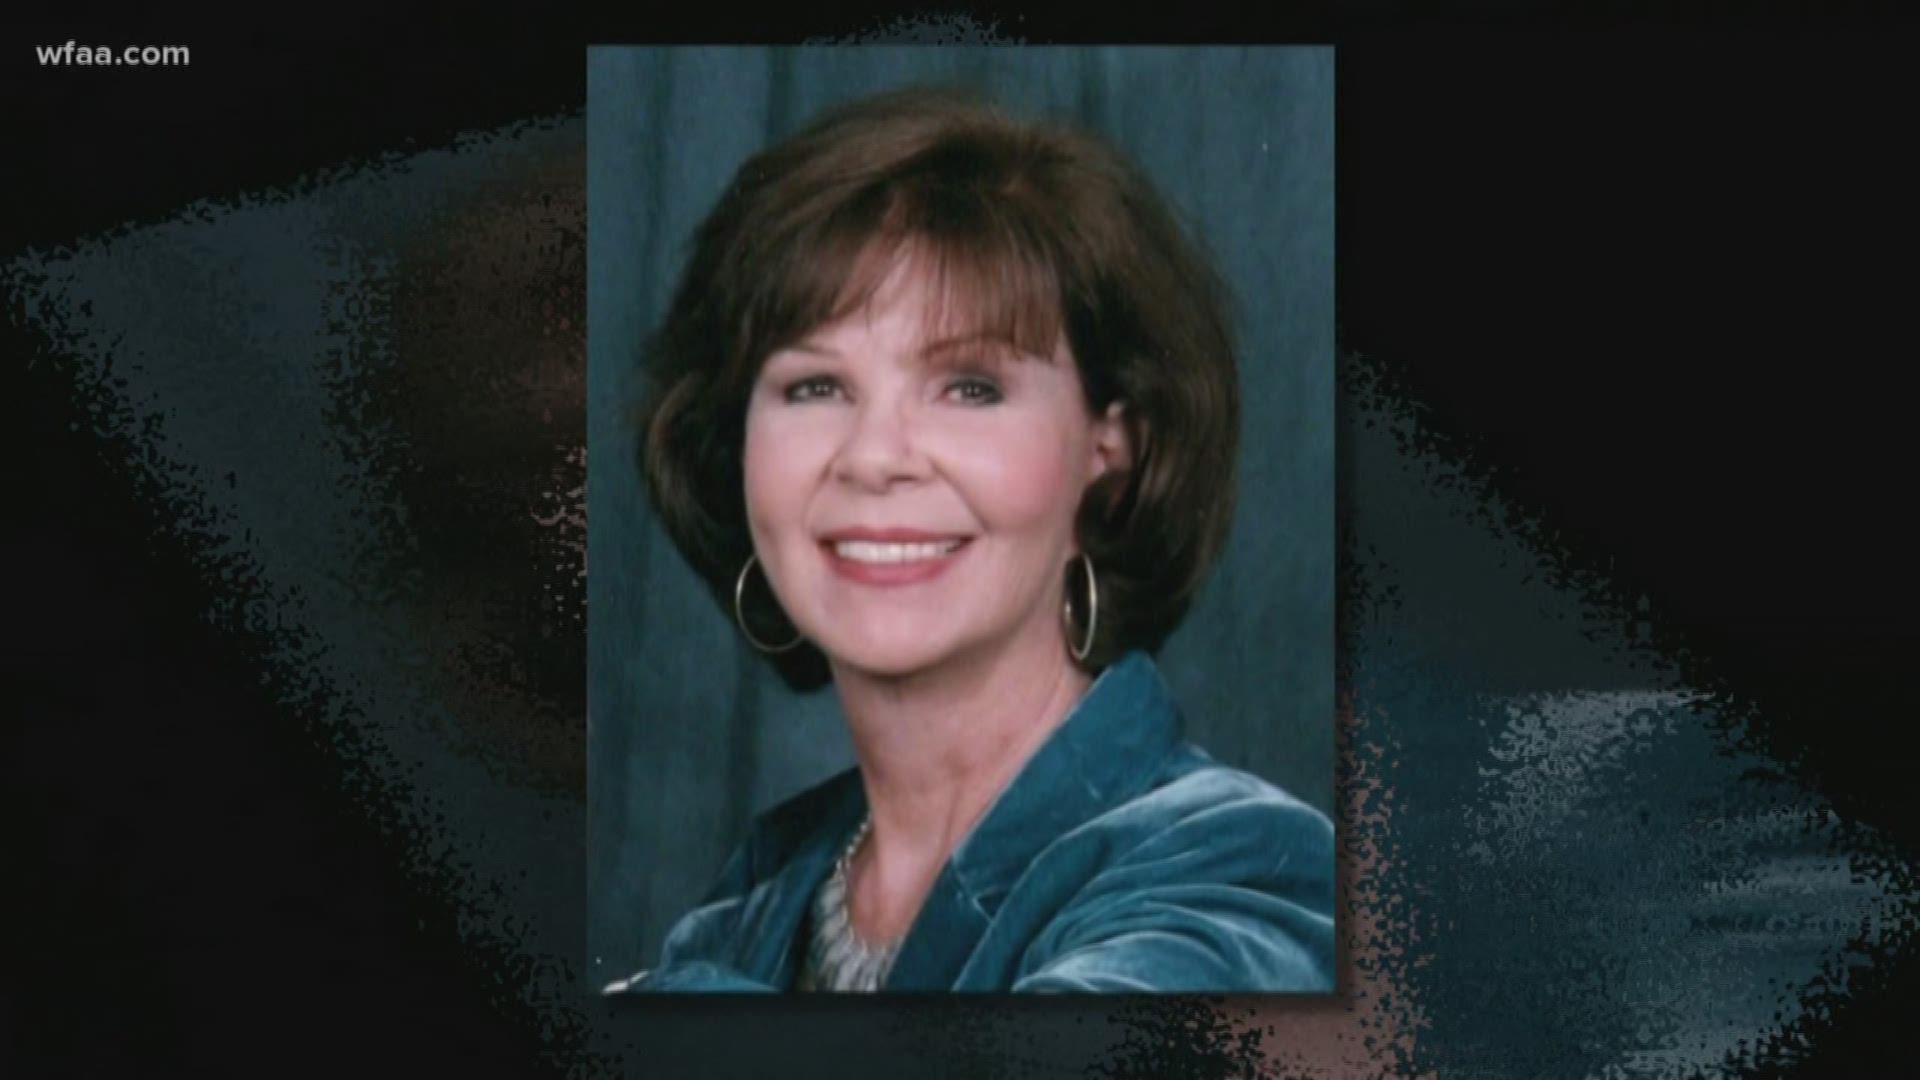 A breakthrough in a 2007 North Richland Hills cold case could mean peace and long-awaited justice for the family of 68-year-old Marianne Wilkinson.